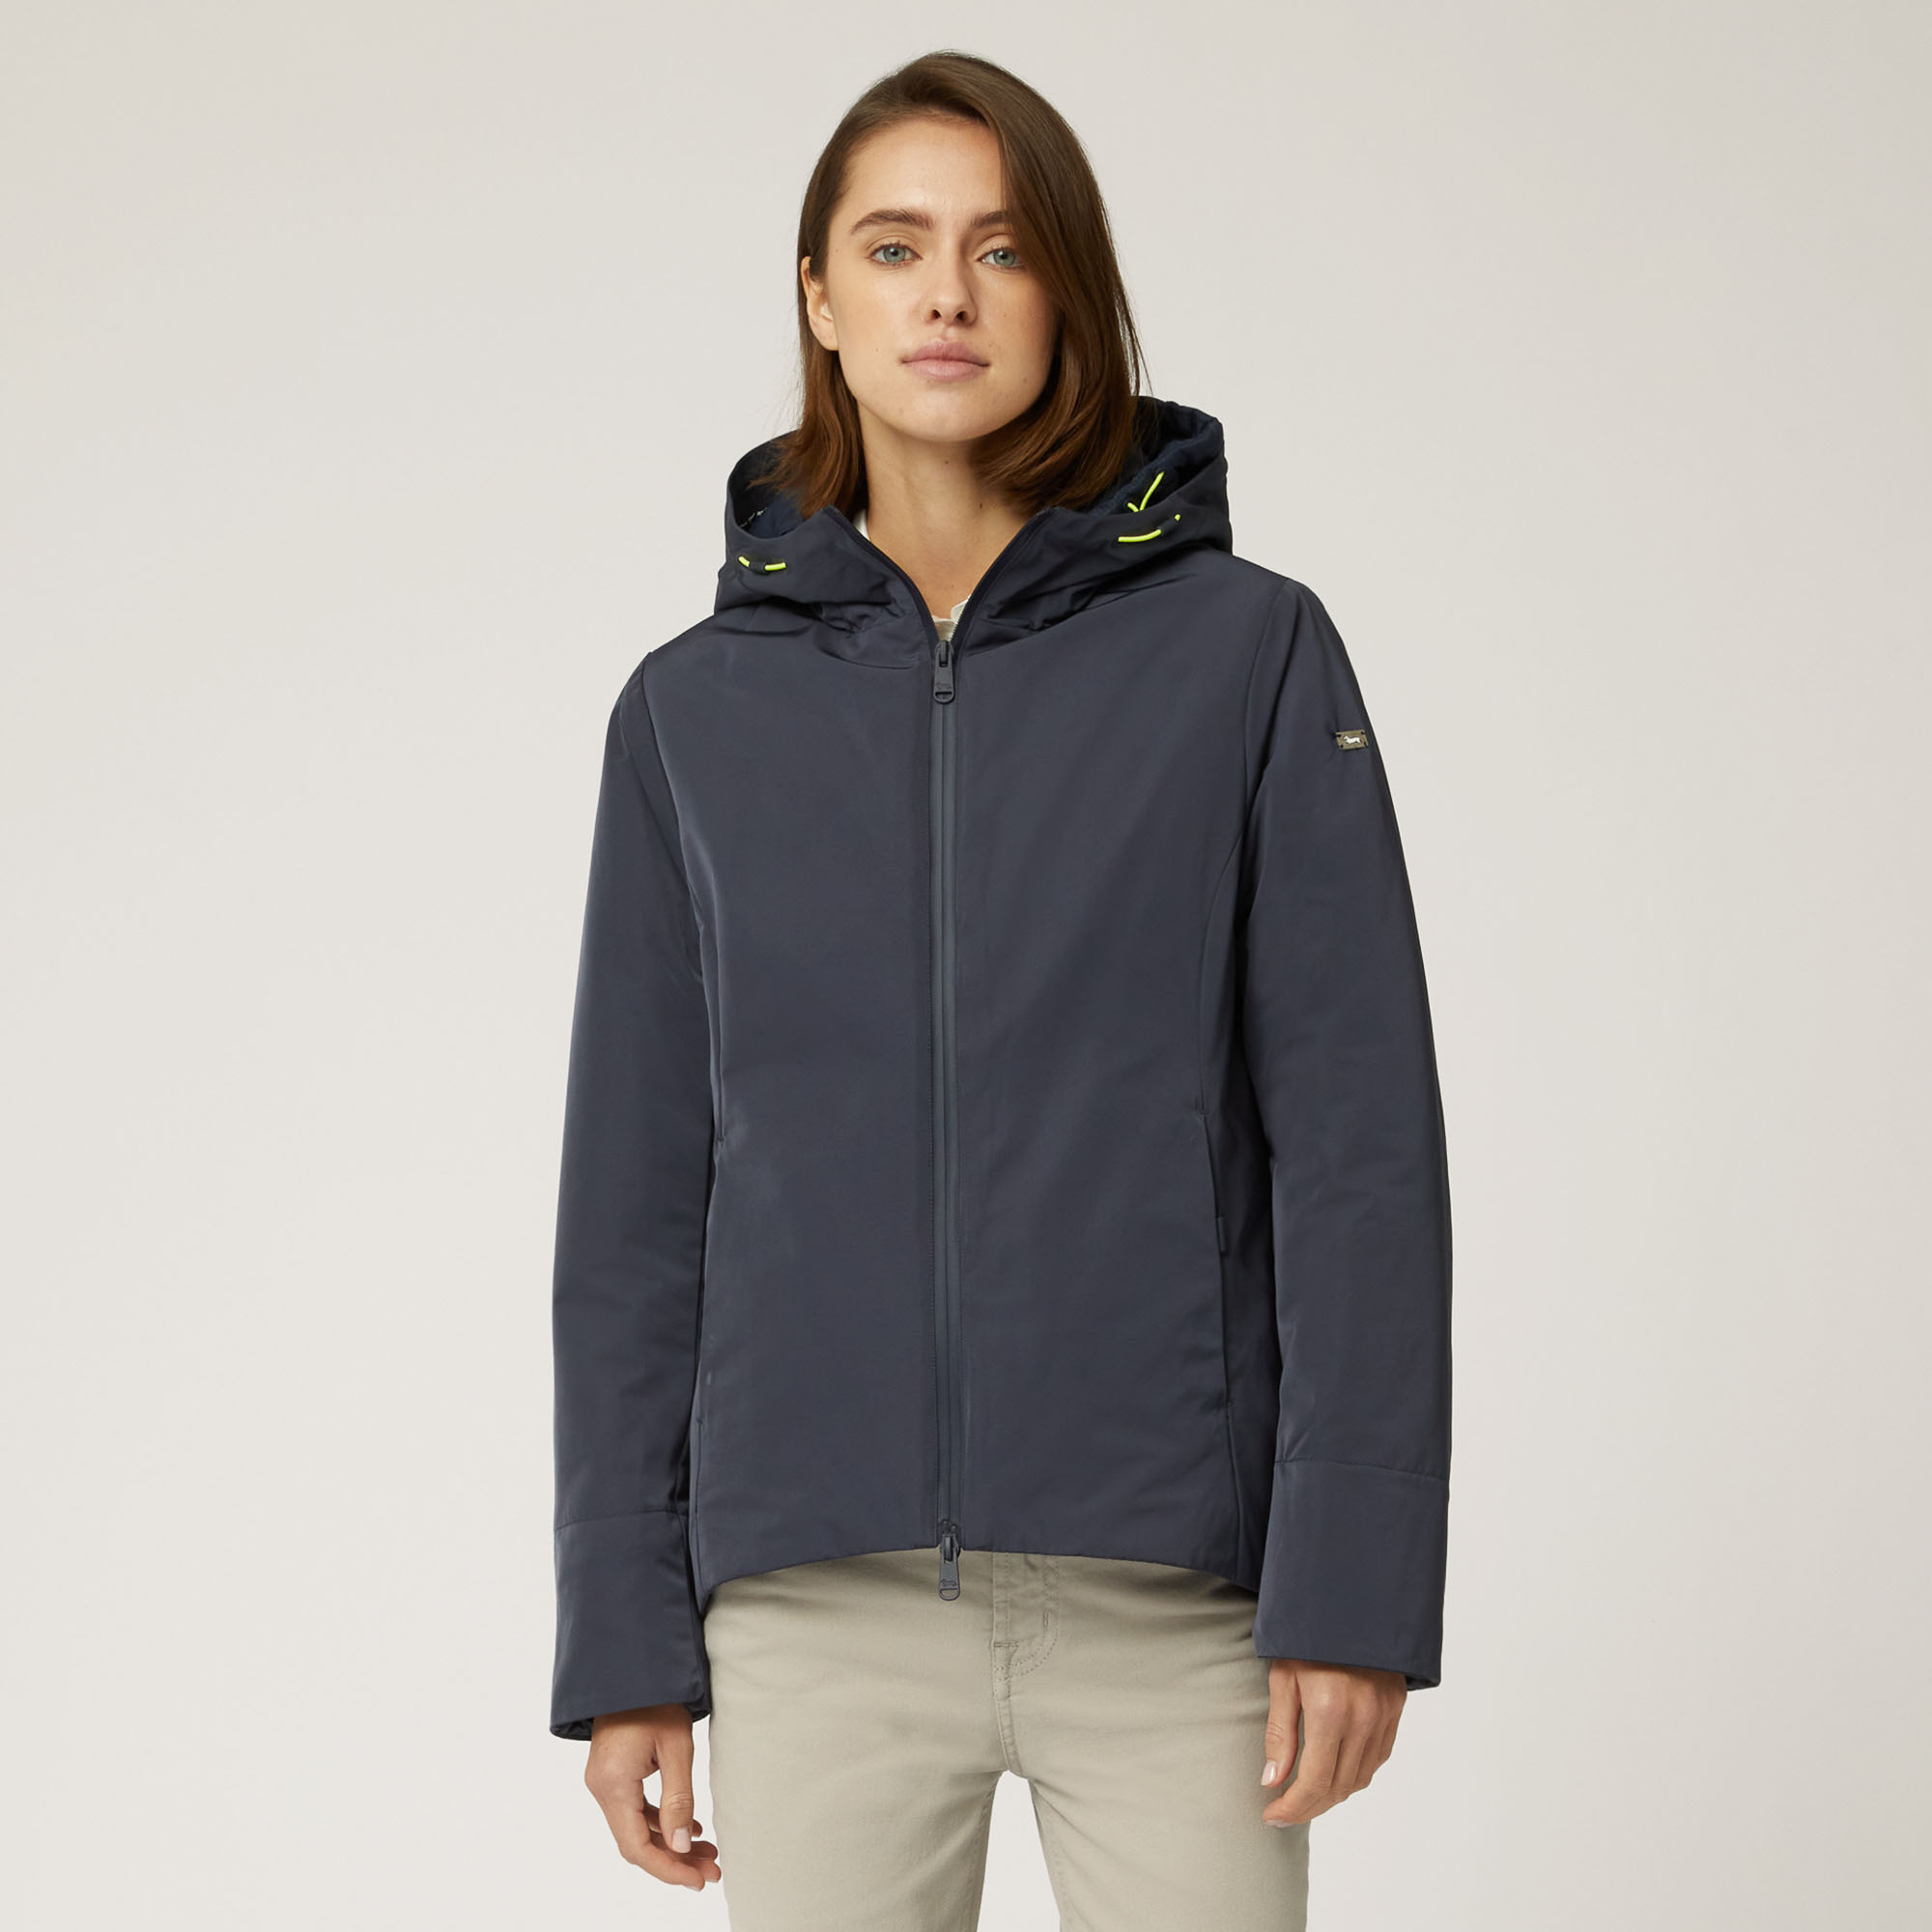 Giubbotto In Softshell Con Interno Stampato Elevate Dutility, Blu Navy, large image number 0